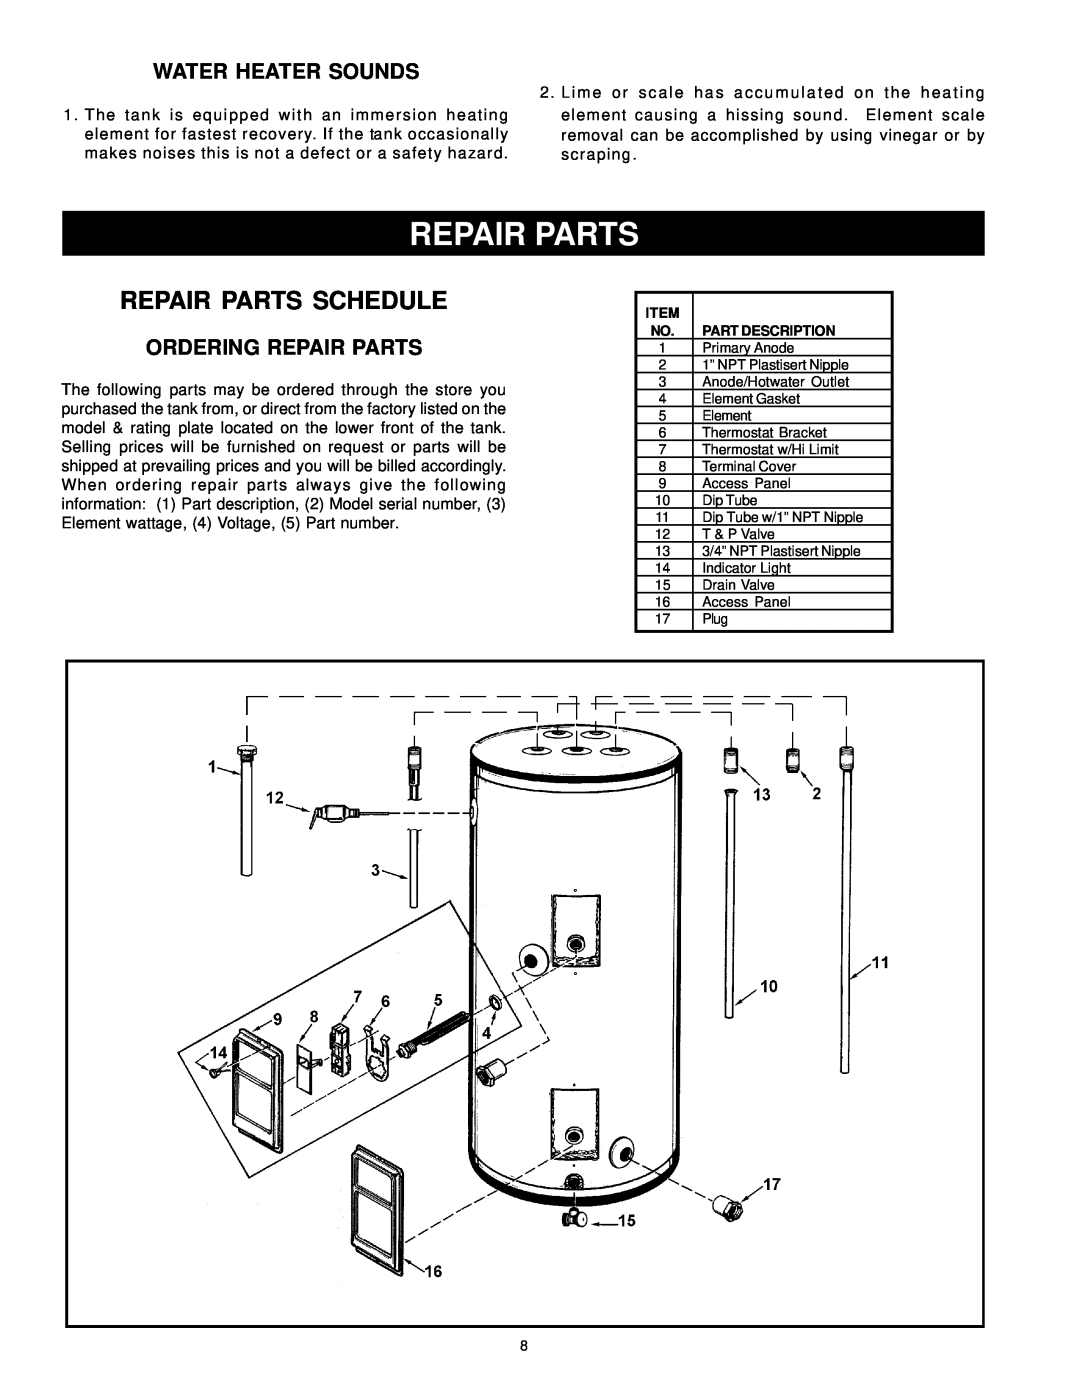 State Industries SGV 120 10TS, 198067-000 Repair Parts Schedule, Water Heater Sounds, Ordering Repair Parts 